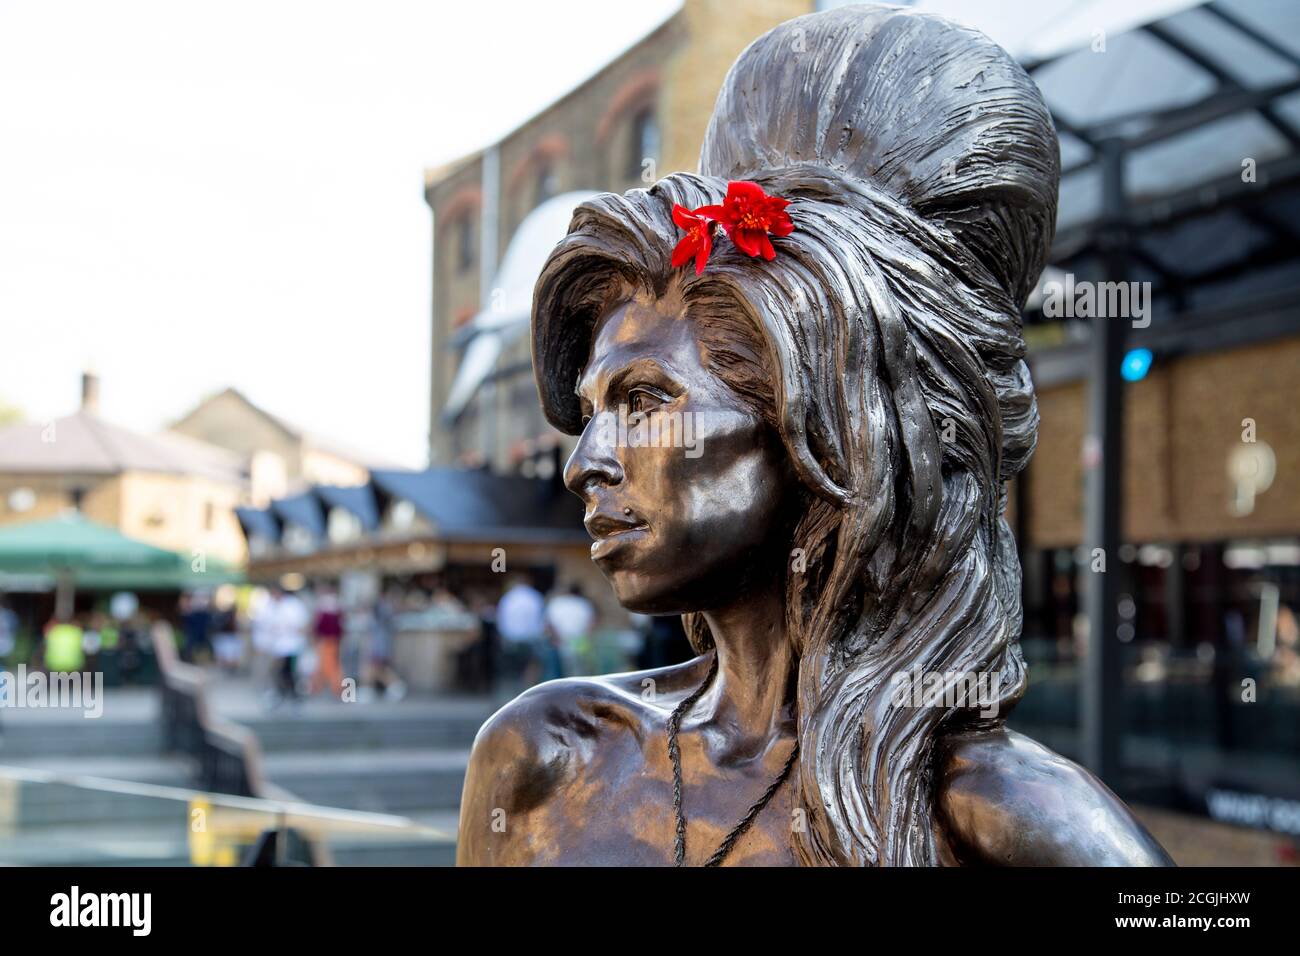 Sculpture of singer Amy Winehouse by Scott Eaton at Camden Stables Market, London, UK Stock Photo